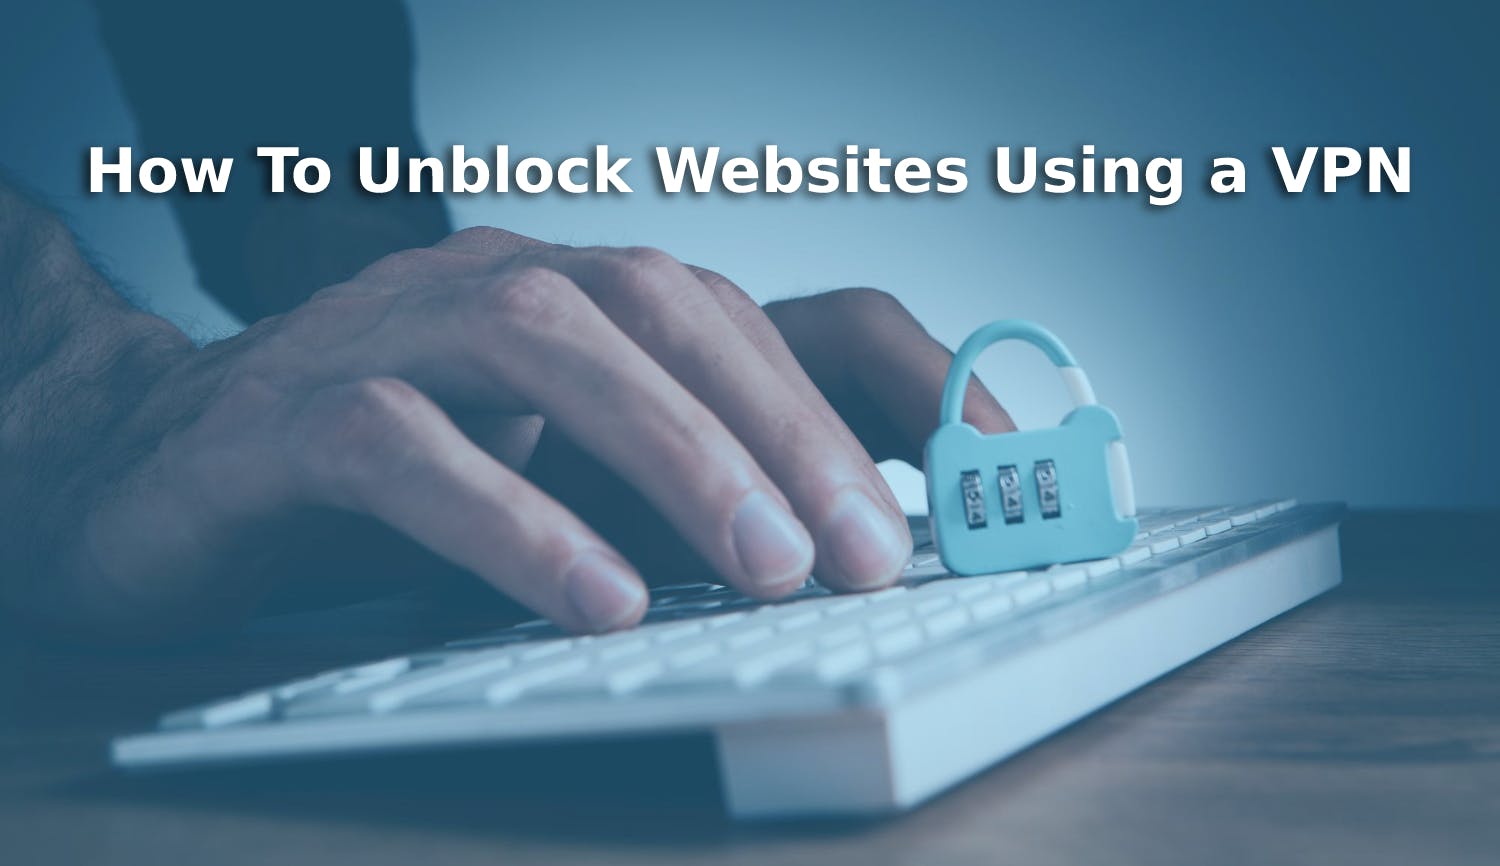 How To Unblock Websites Using a VPN